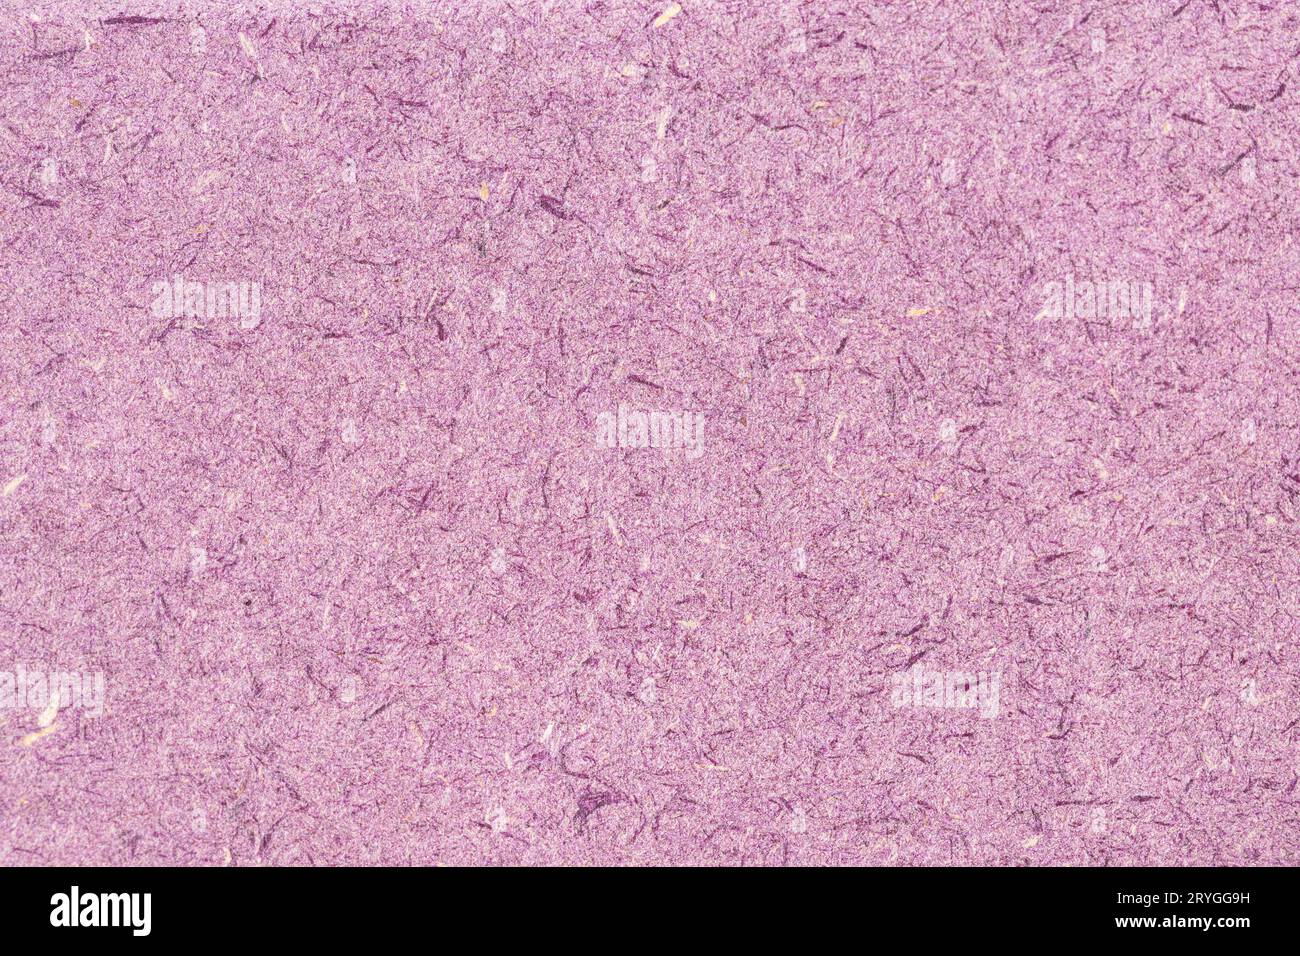 Purple color Fiberboard MDF Wood abstract Background texture. Full frame Stock Photo